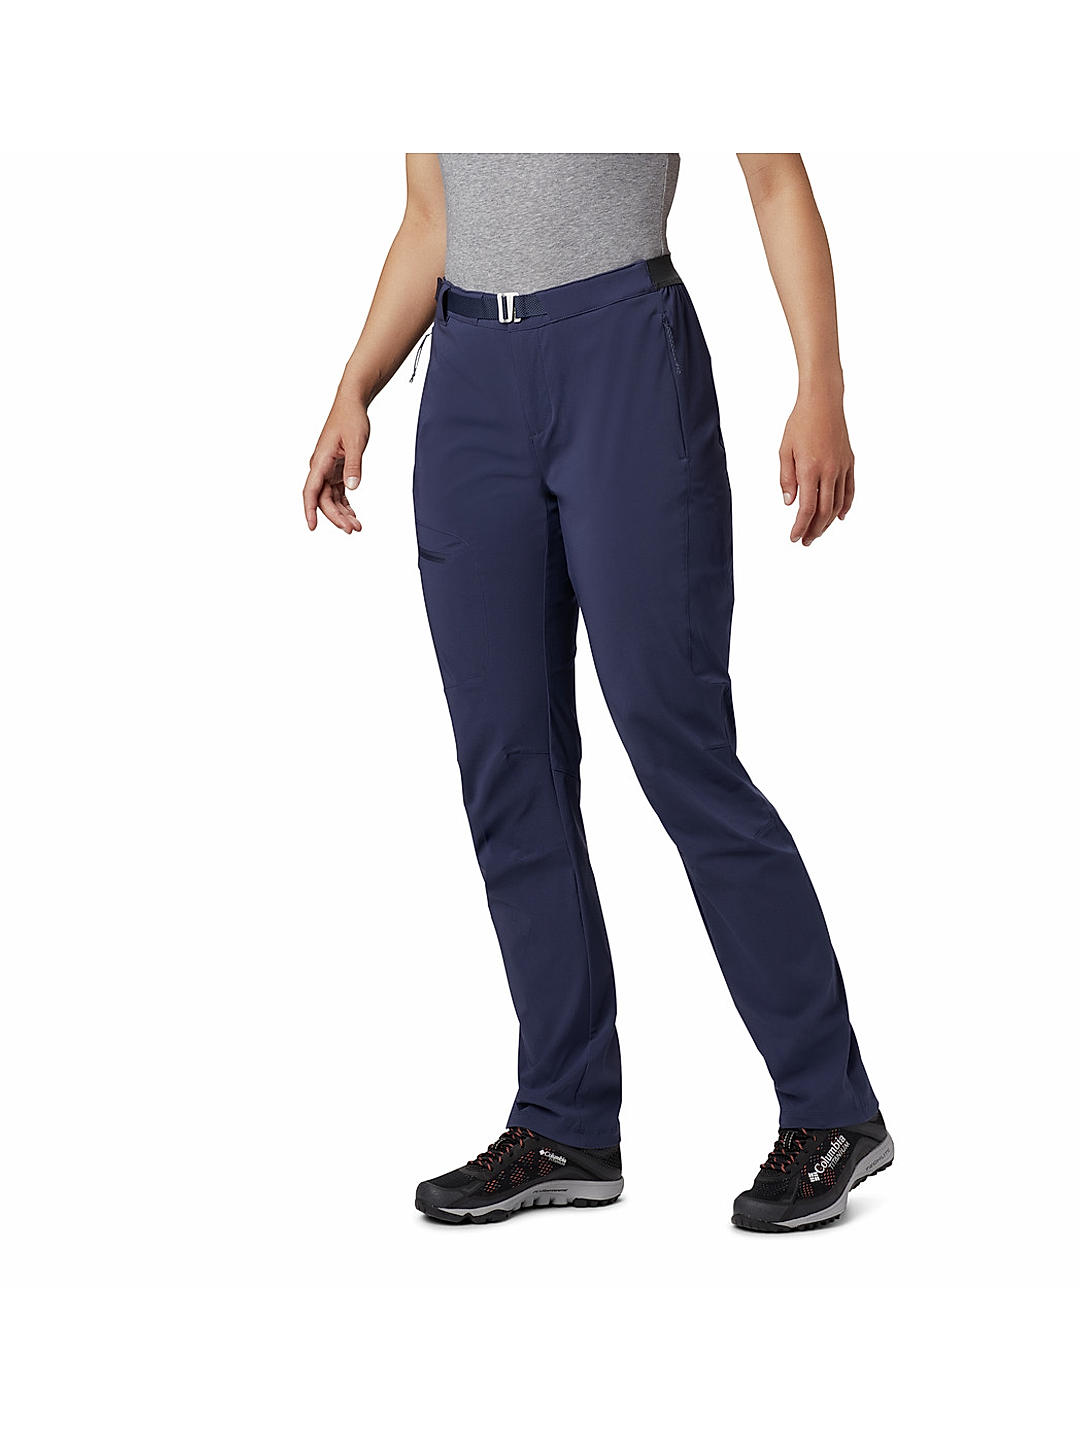 Puma Golf Trousers  Pants Premium Golf Clothing New Collection Online   Clubhouse Golf